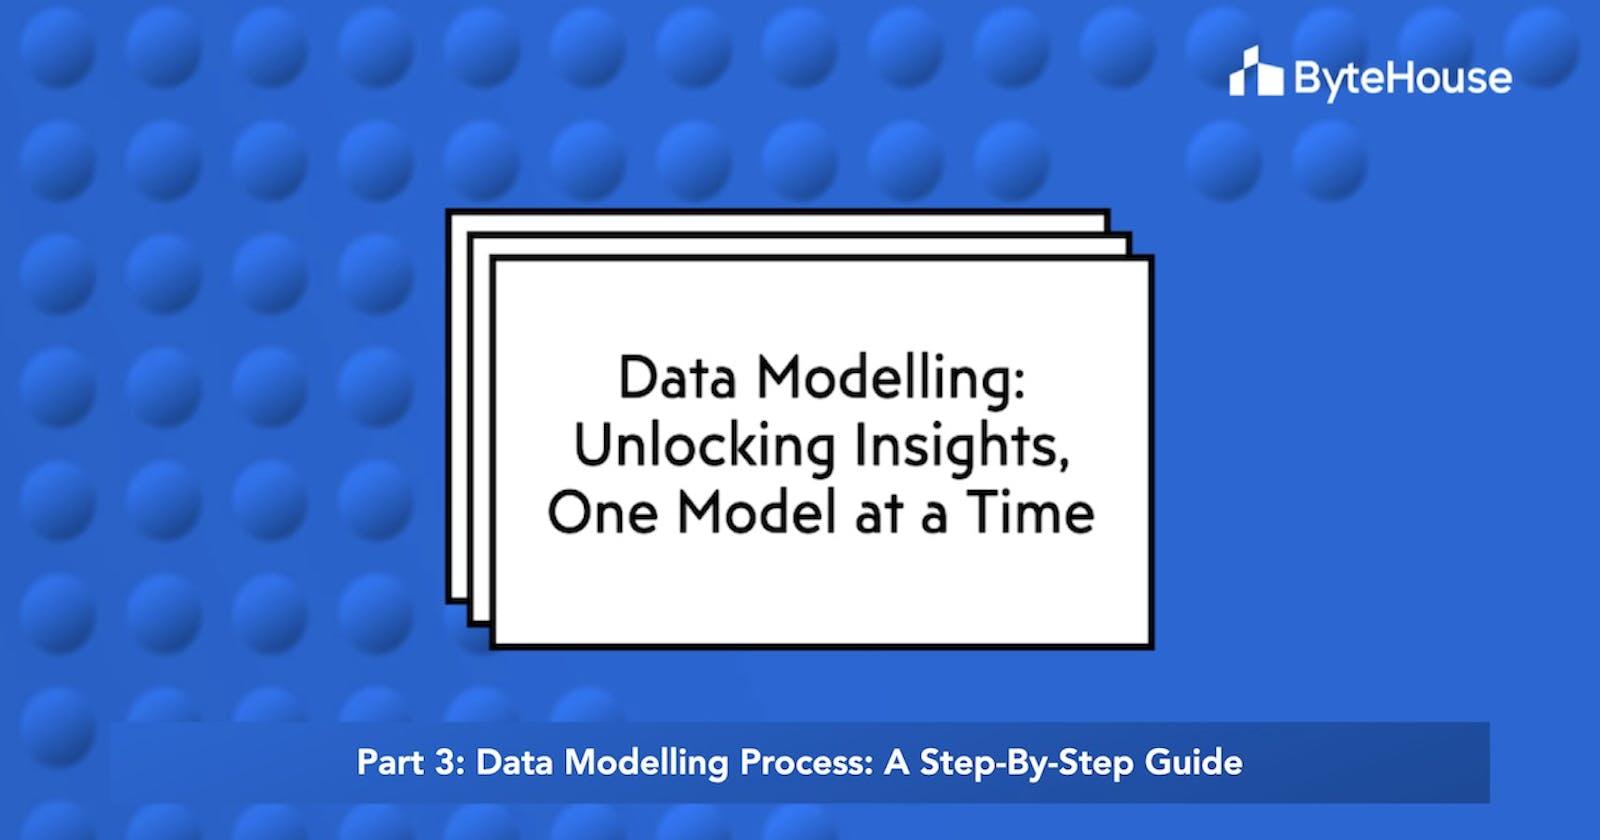 The data modelling process: A step-by-step guide